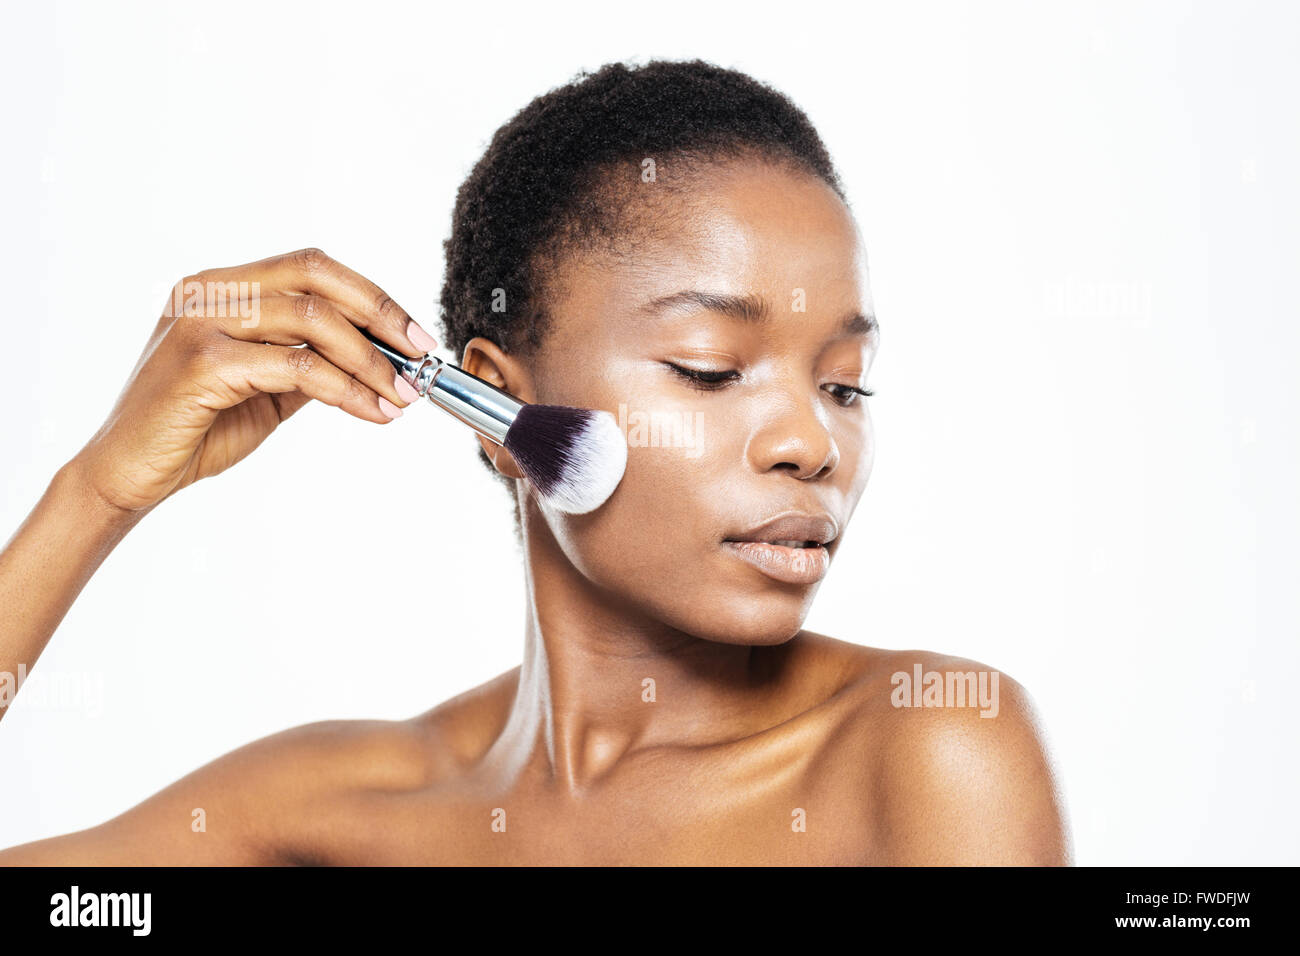 Afro american woman applying makeup with brush isolated on a white background Stock Photo